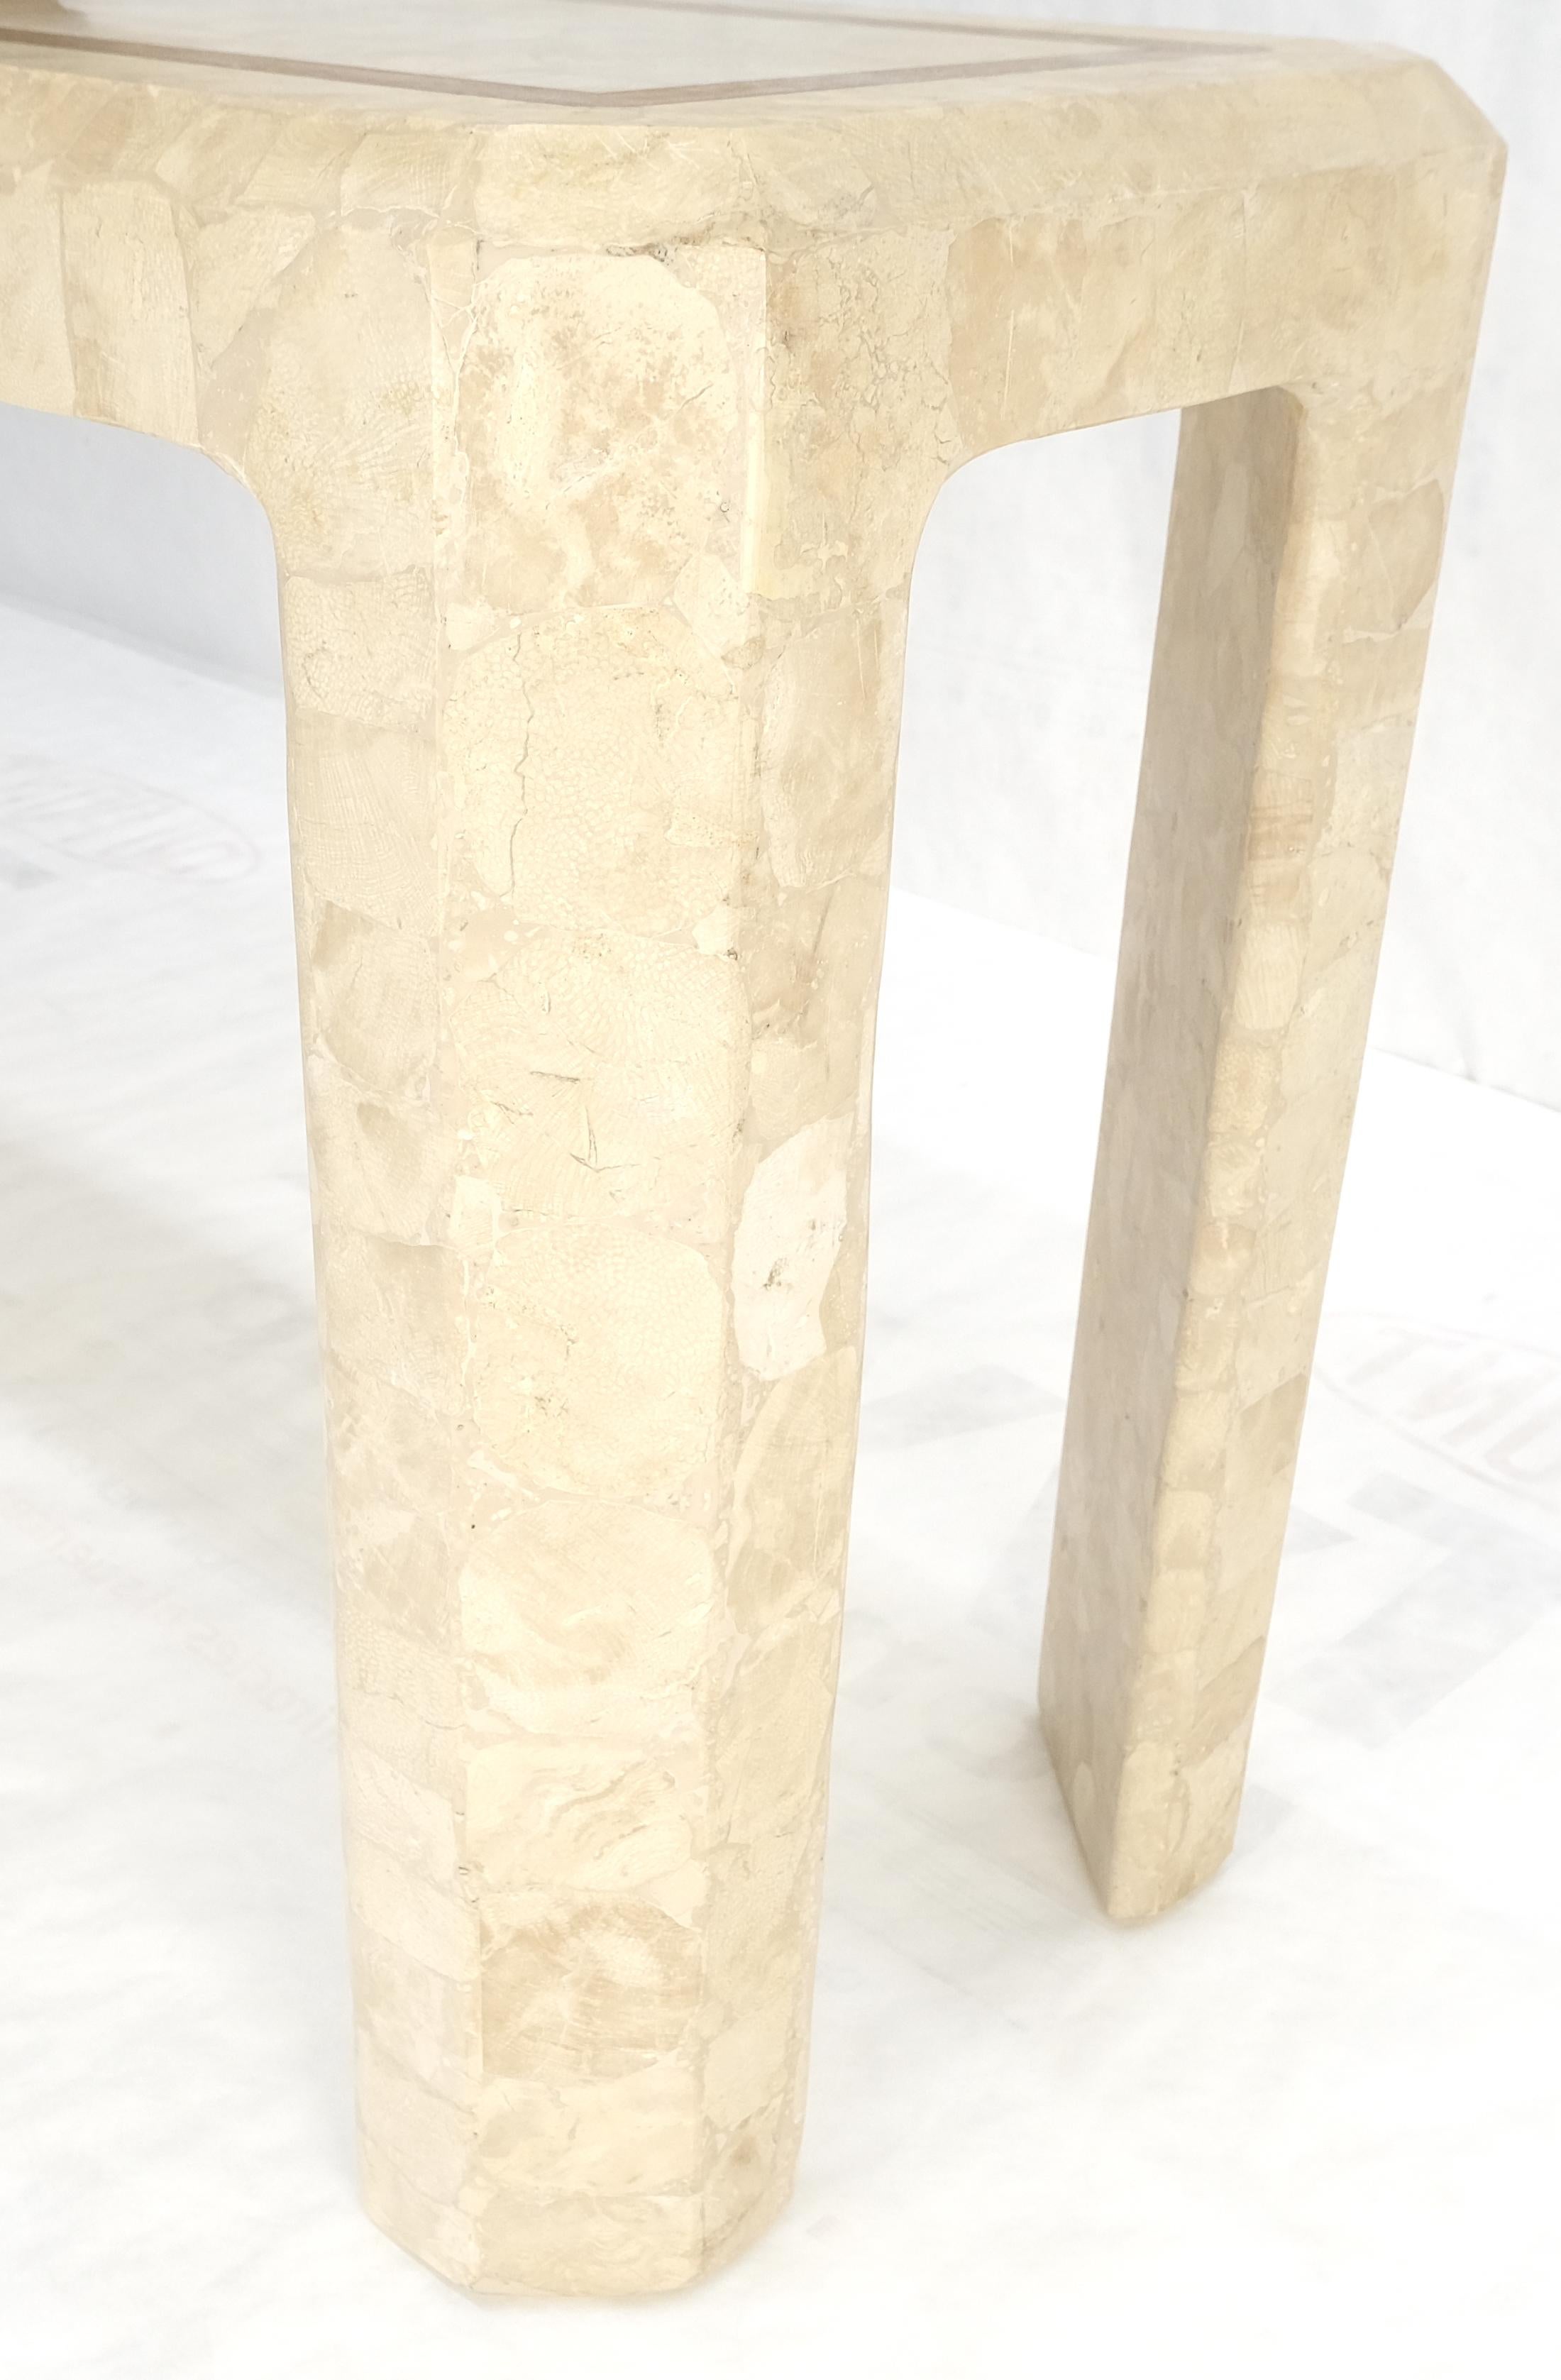 Veneer Tessellated Travertine Inlayed Top Console Sofa Table Mid Century Modern MINT! For Sale